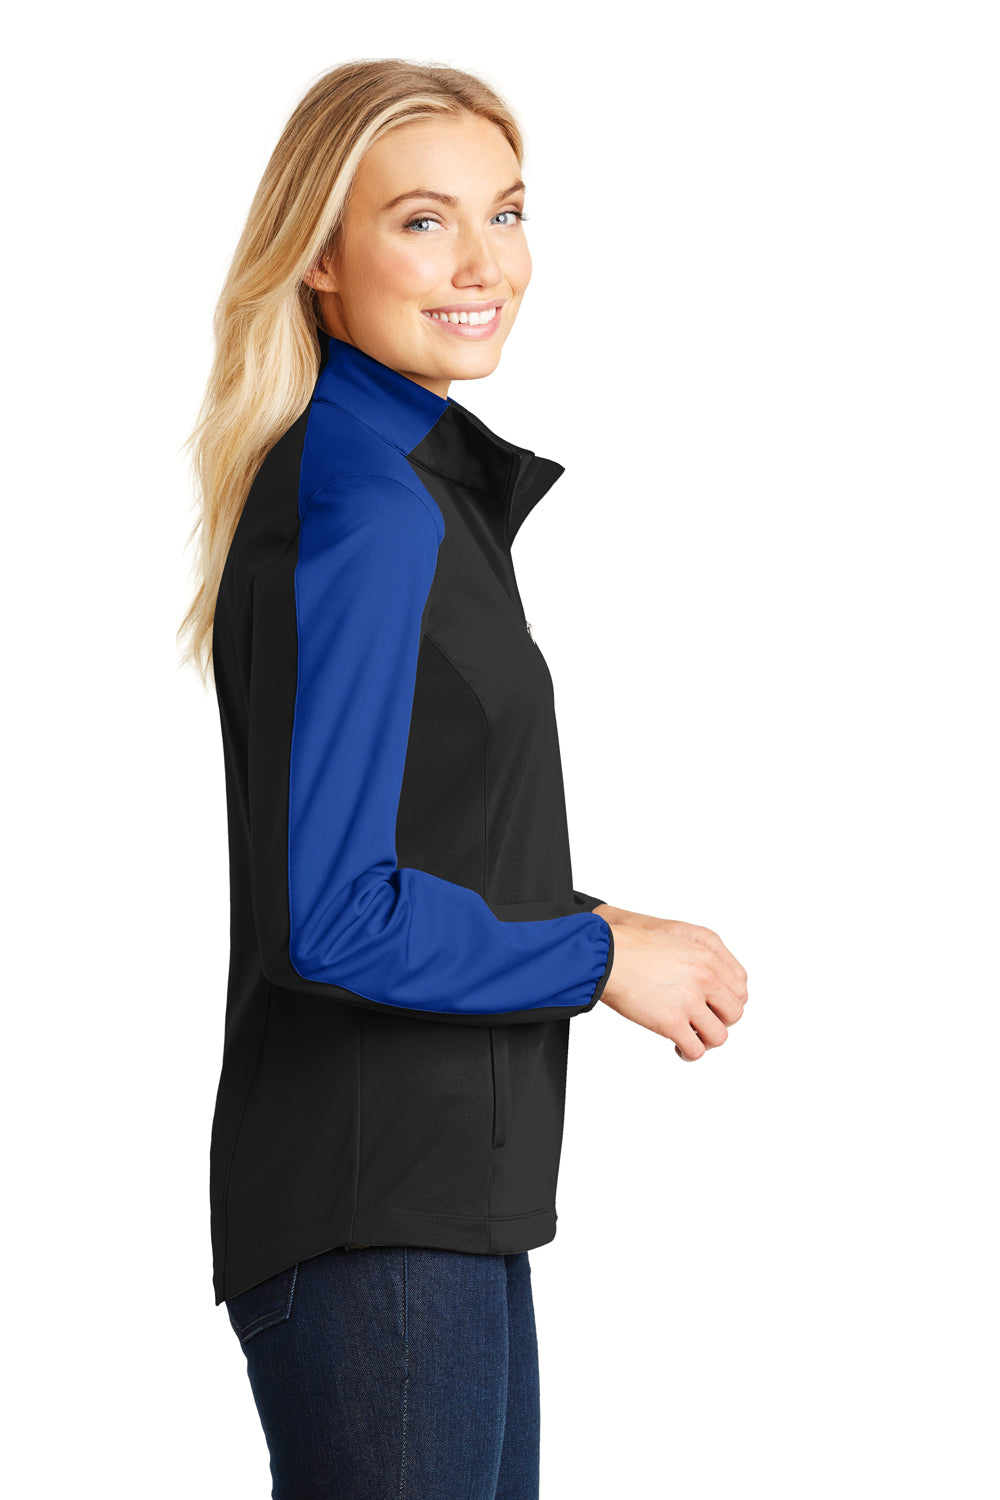 Port Authority L718 Womens Active Wind & Water Resistant Full Zip Jacket Black/Royal Blue Side